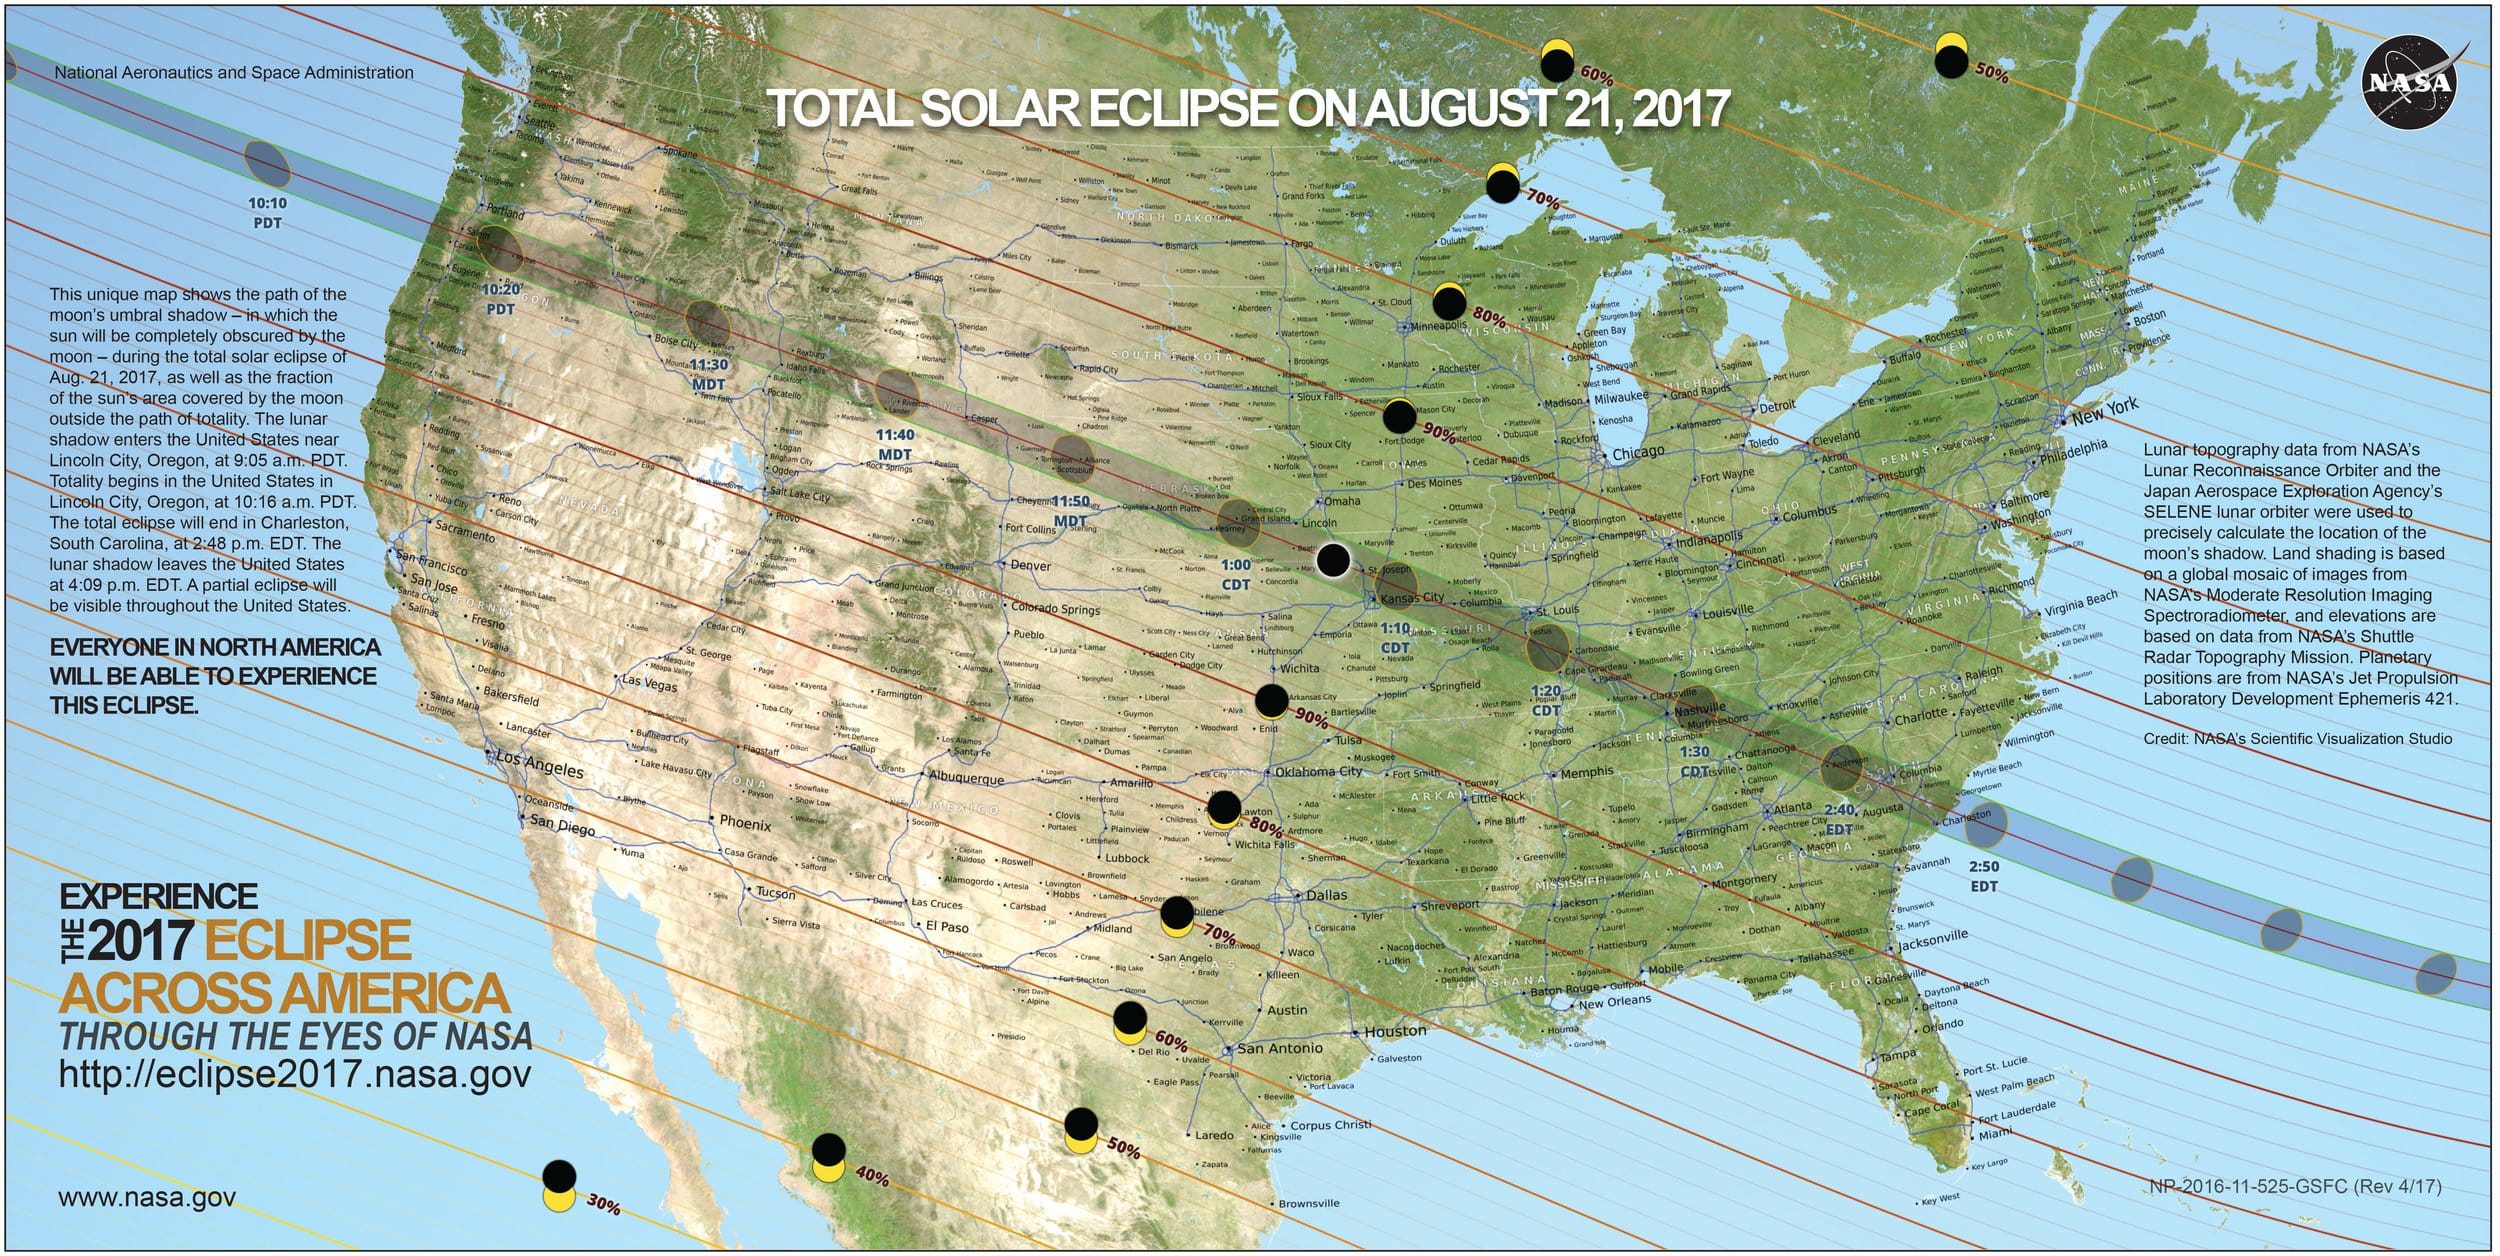 Continental path of the eclipse.Source: NASA